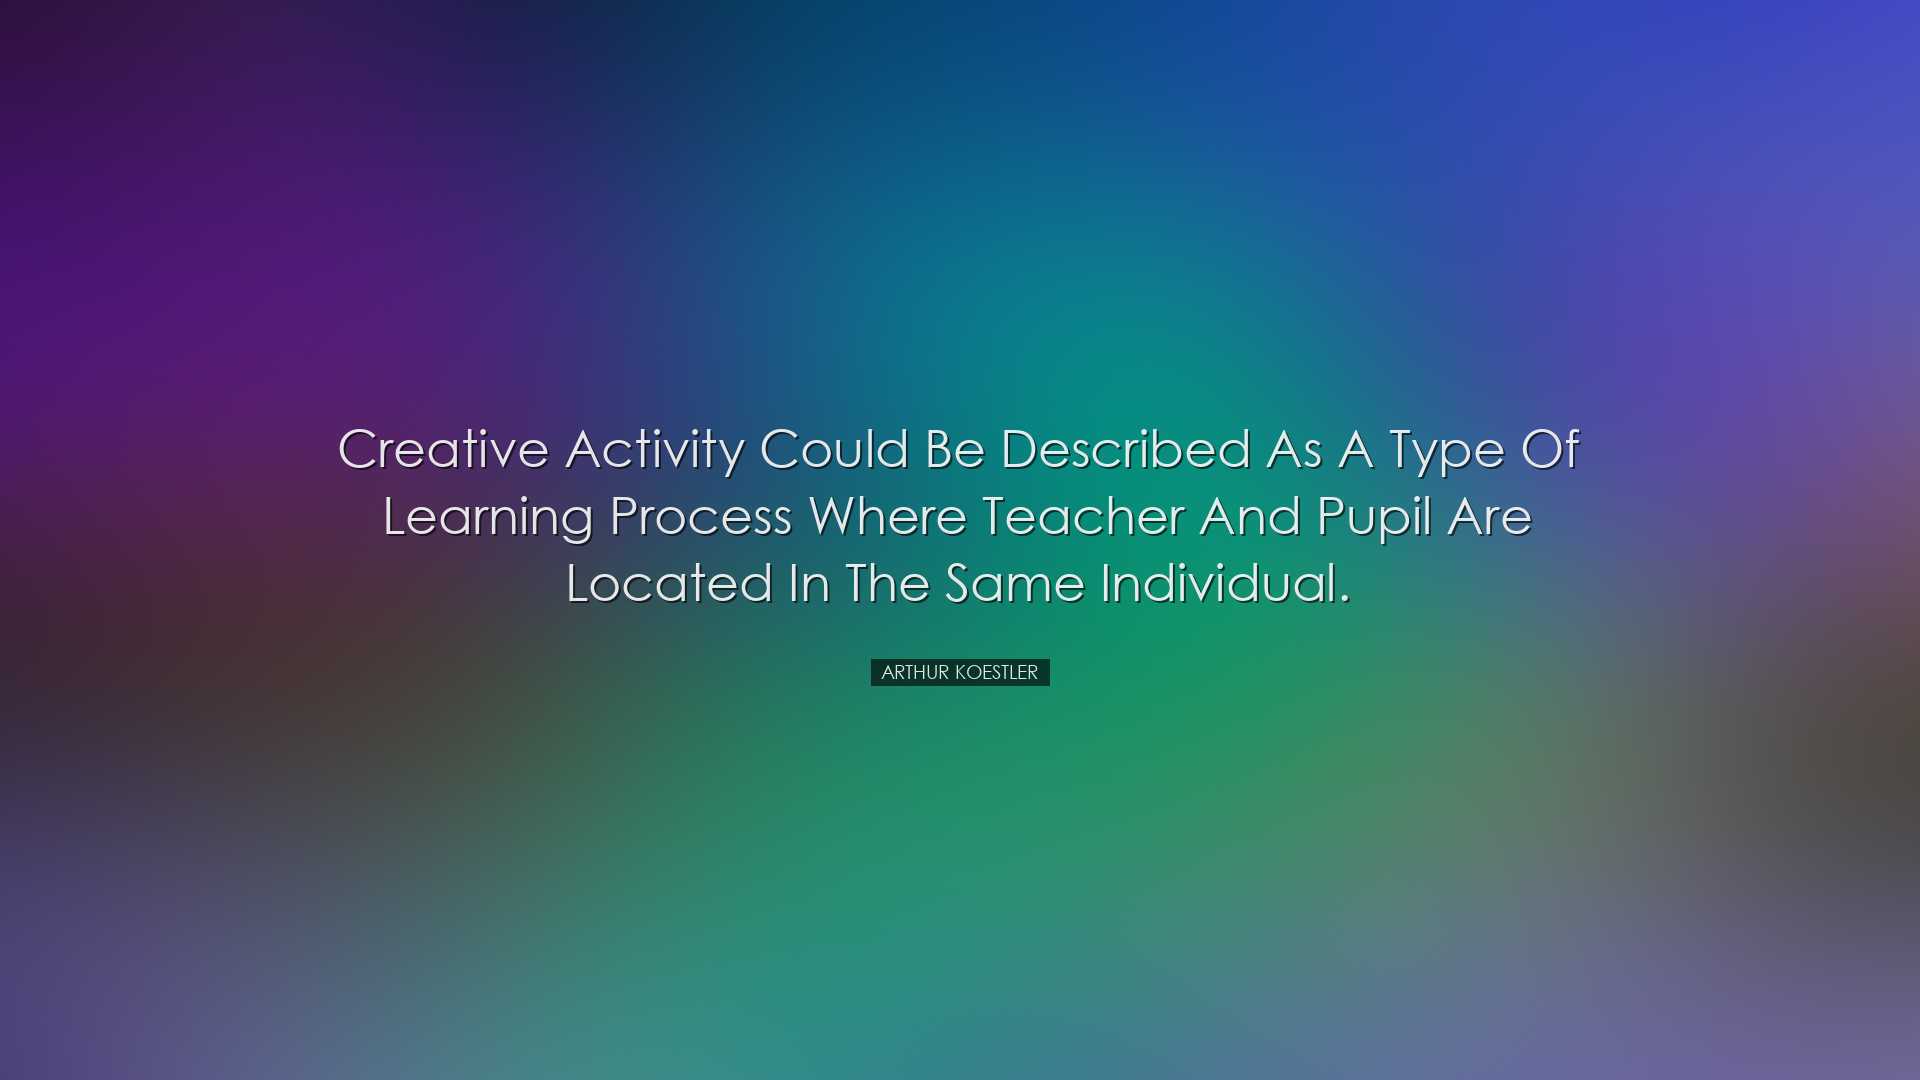 Creative activity could be described as a type of learning process